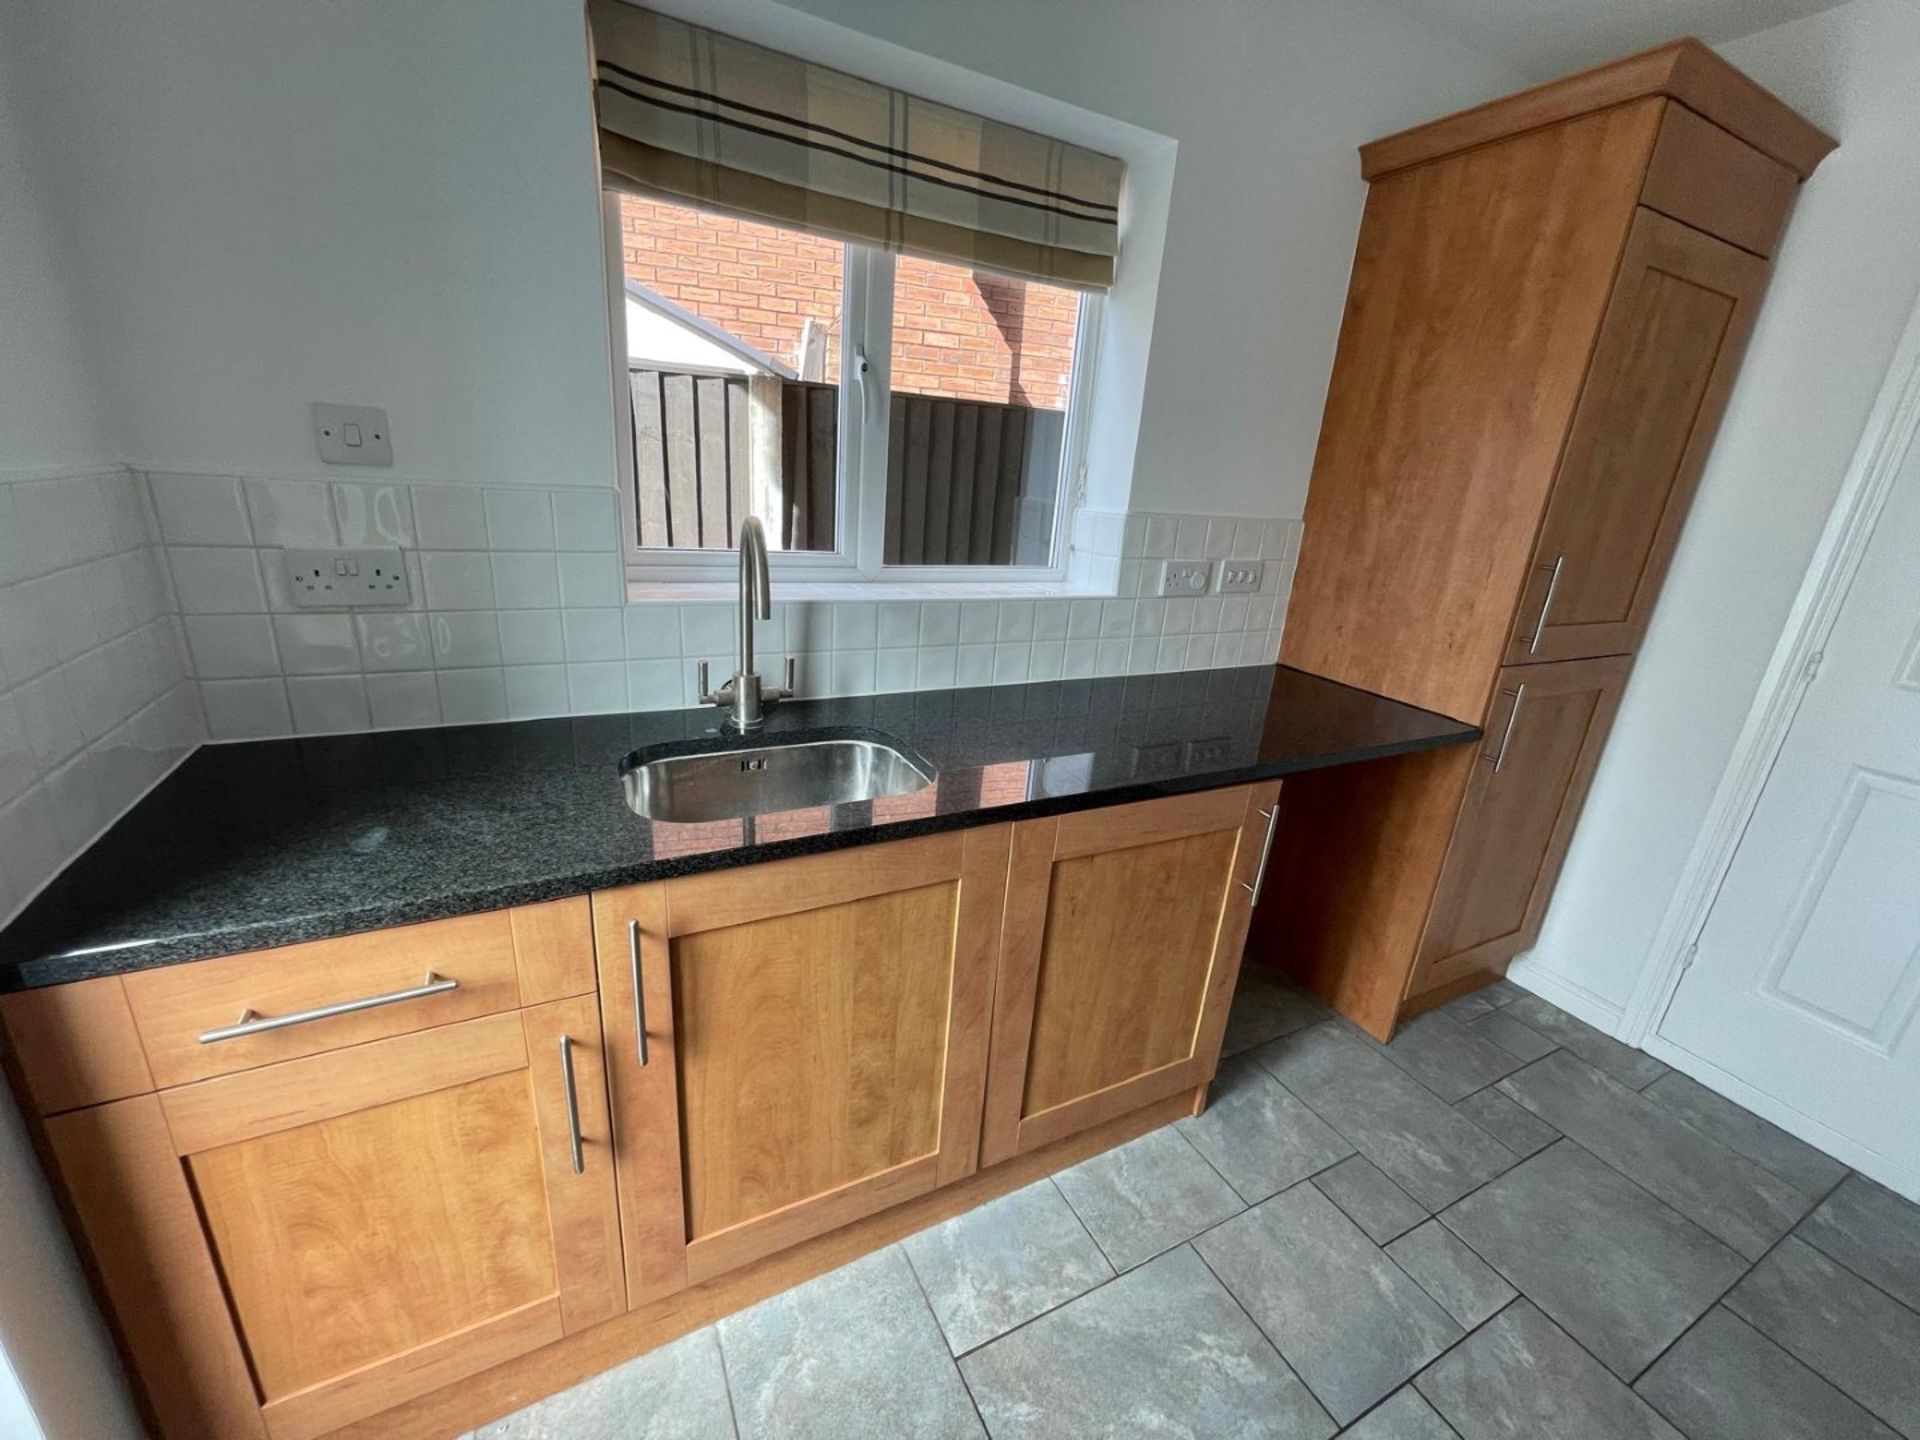 1 x Shaker-style, Feature-rich Fitted Kitchen with Solid Wood Doors, Granite Worktops and Appliances - Image 3 of 111